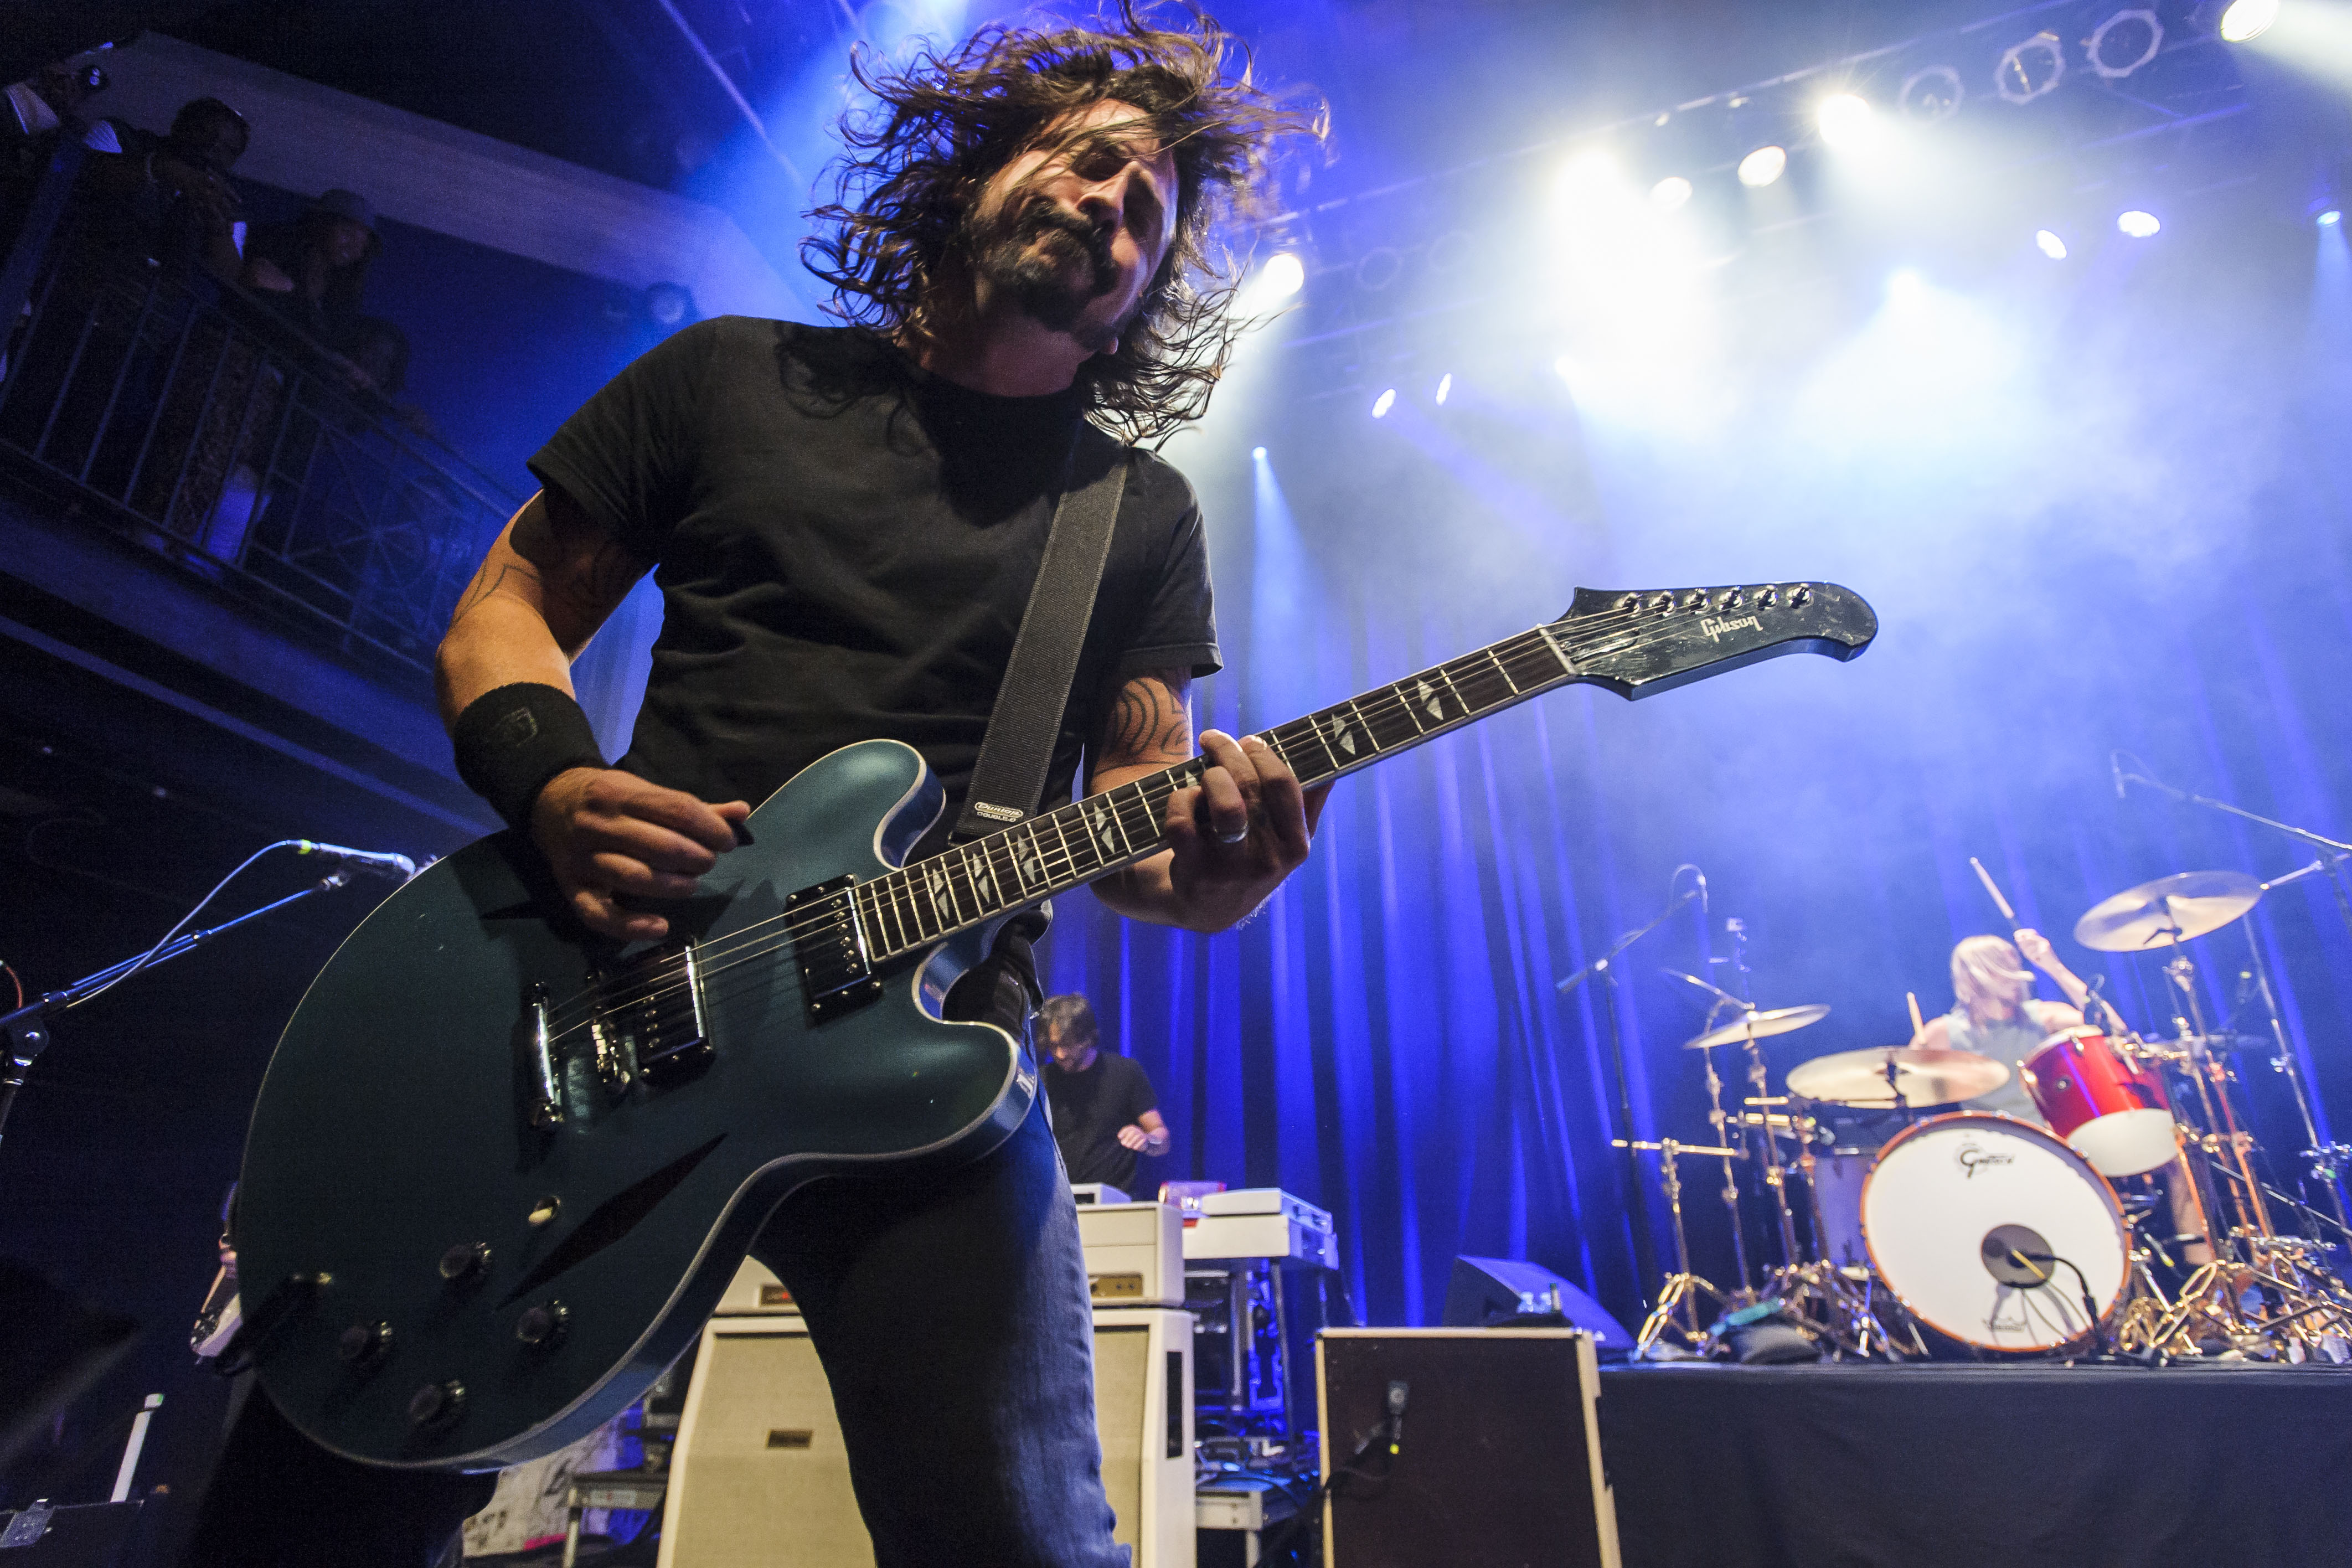 Dave Grohl of the Foo Fighters performs at the 9:30 Club in Washington on May 5, 2014. (Kyle Gustafson—The Washington Post/Getty Images)